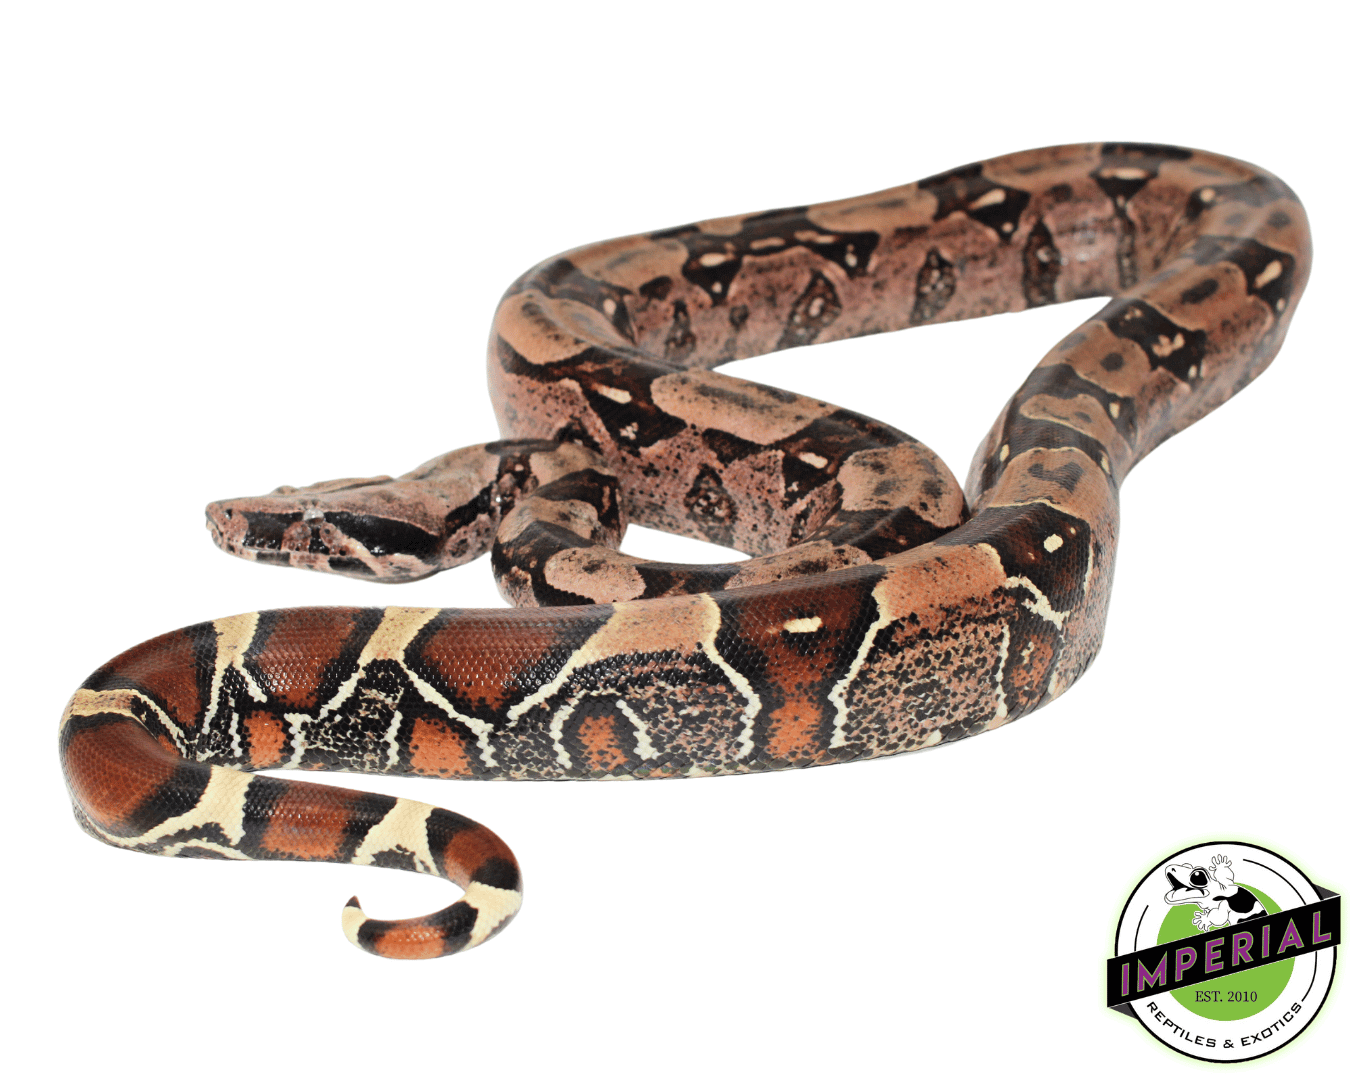 guyana true red tail boa constrictor for sale, buy reptiles online